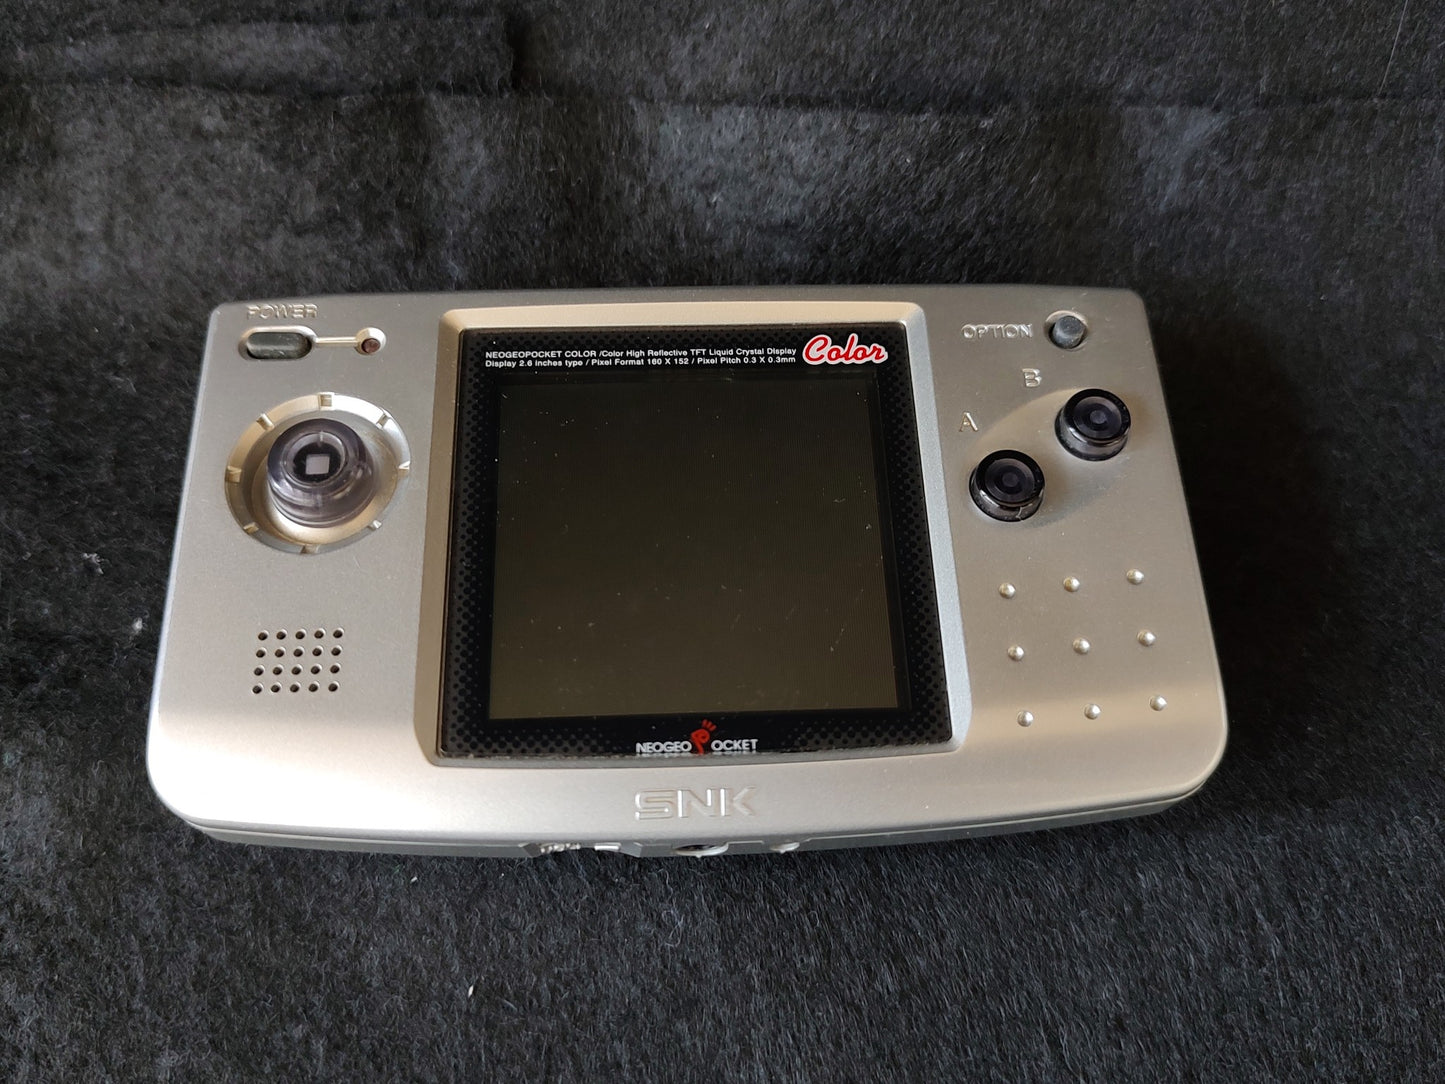 SNK NEOGEO POCKET Color NGPC SOLID SILVER Console Boxed NEO GEO set-f1005-